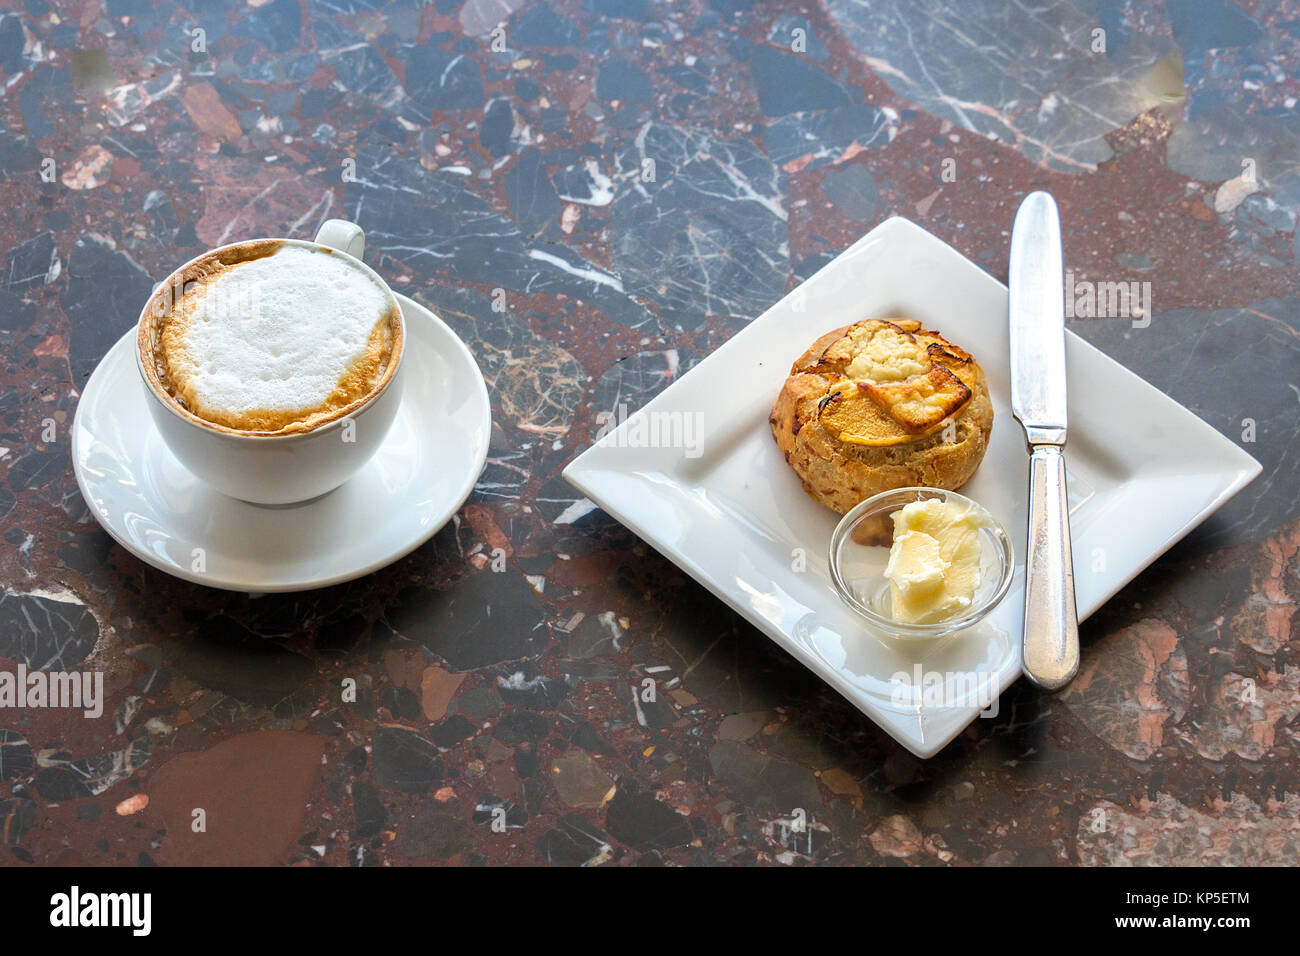 Hight view of a white cup of cappuccino with a scone with butter on a plate with a knife on a table, indoors. Stock Photo